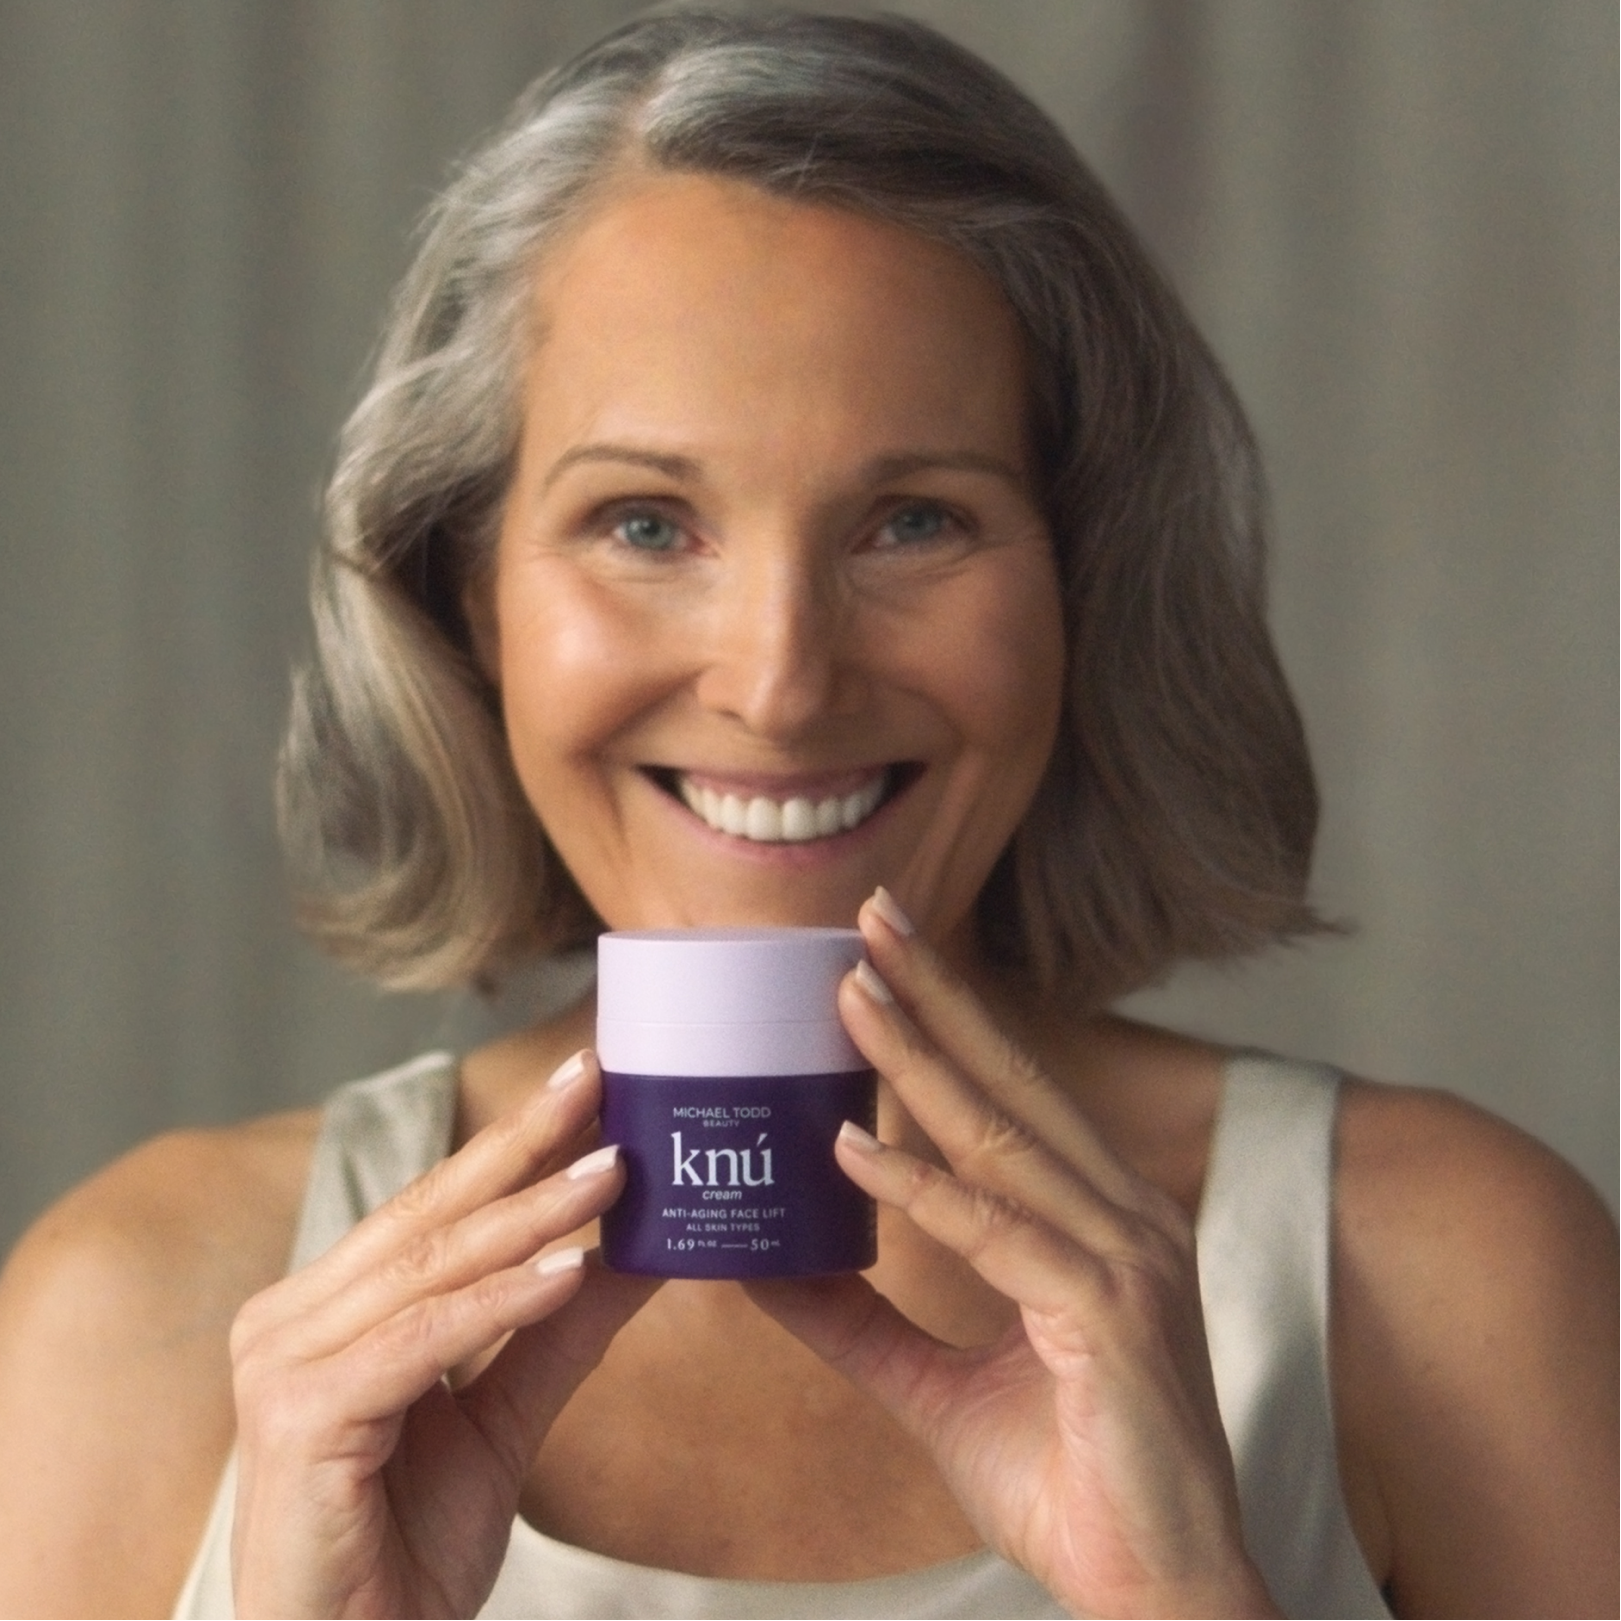 A woman holding a jar of Knú Ageless Duo serum from Michael Todd Beauty for rejuvenating her skin.